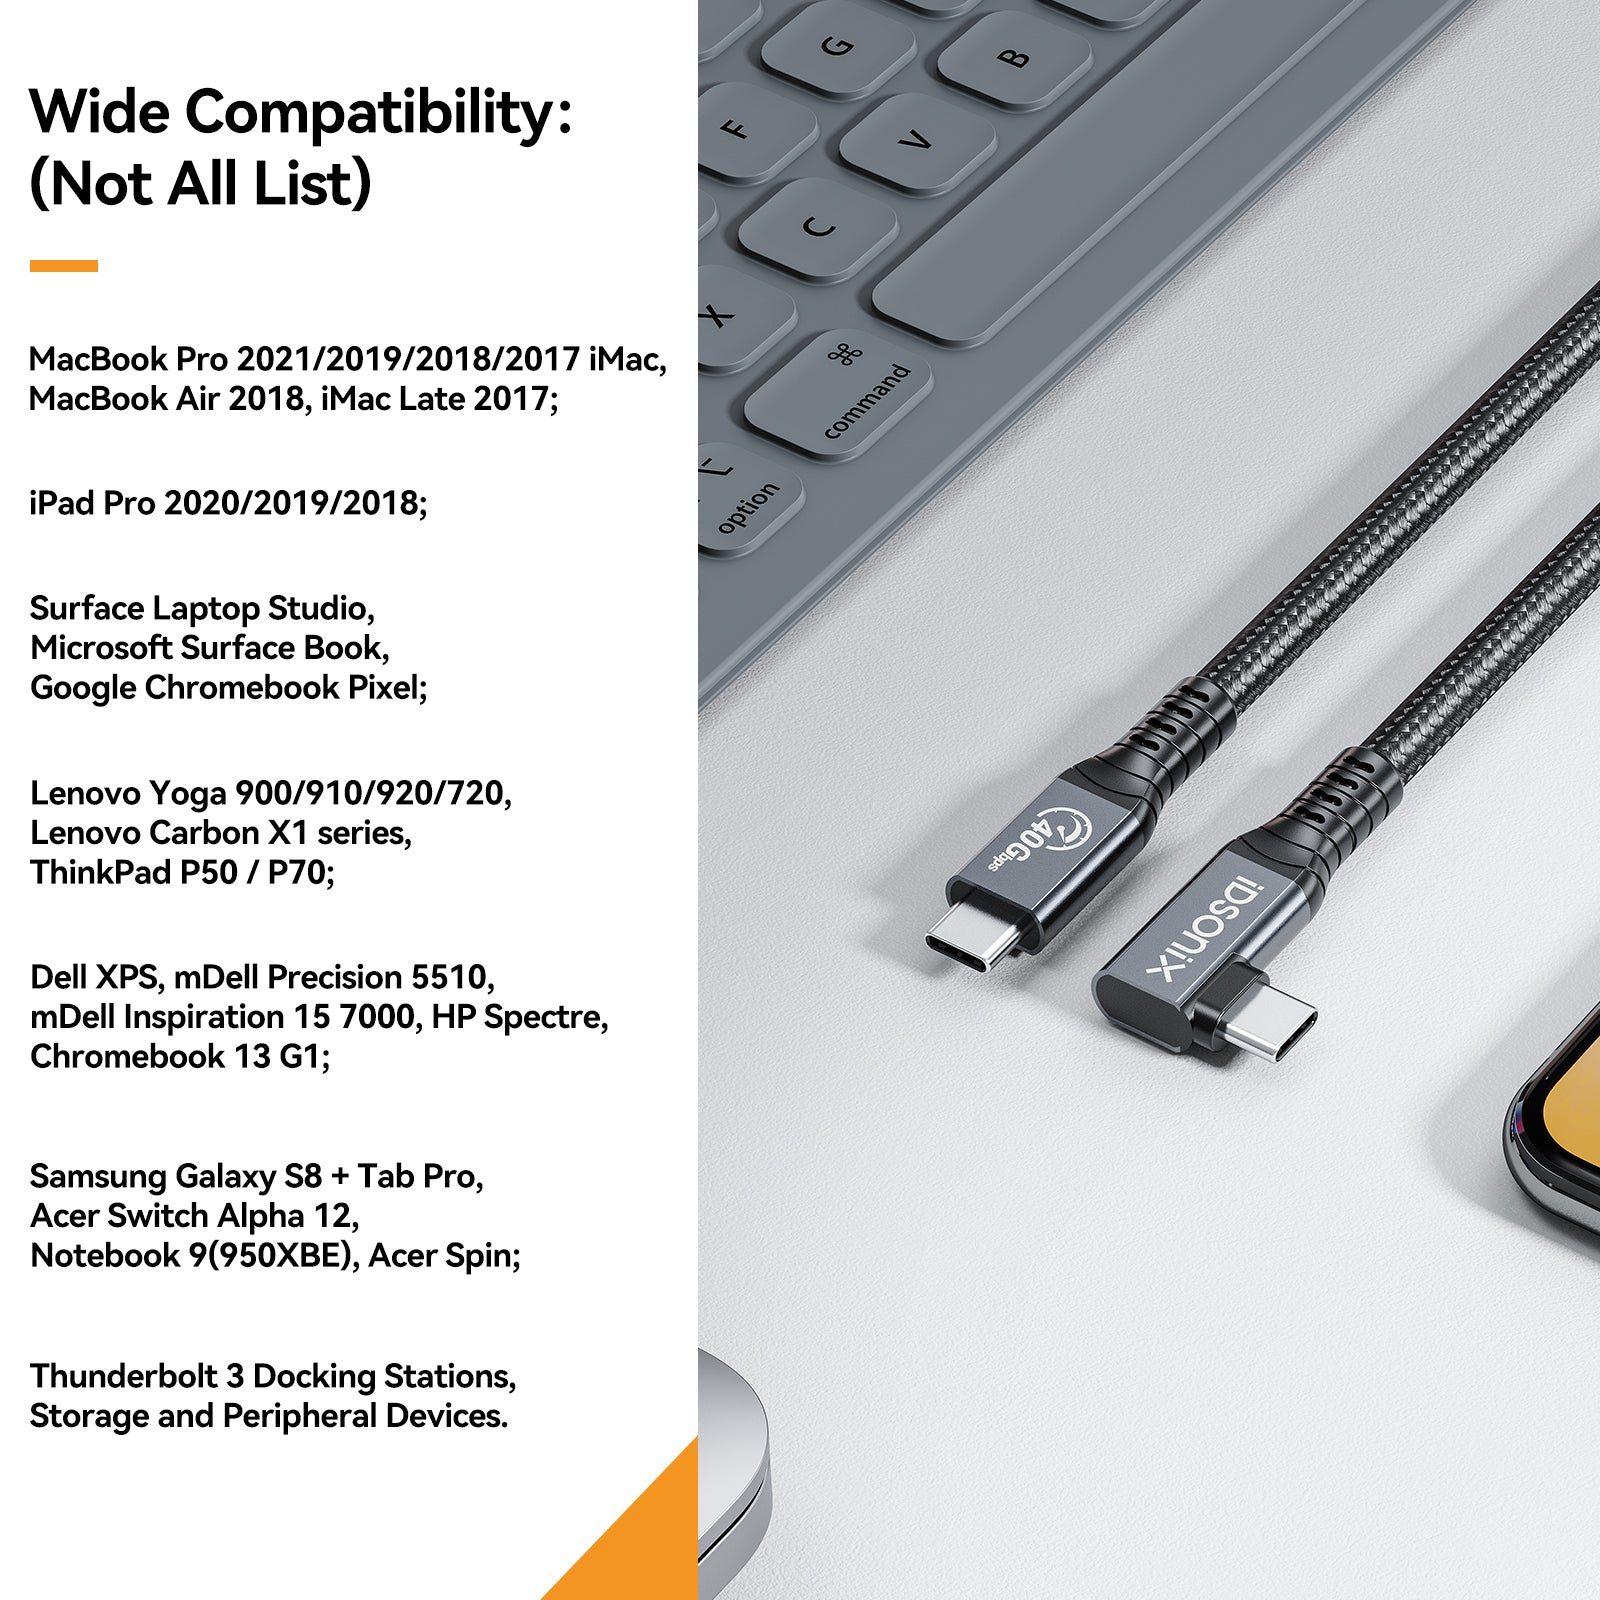 iDsonix Cable for Thunderbolt 4 Cable Supports 40Gbps Data Transfer, Single 8K or Dual 4K Displays,Type C Cable with 100W Charging, Compatible with Thunderbolt 3 Cable, MacBooks, USB C, Hub, SSD etc